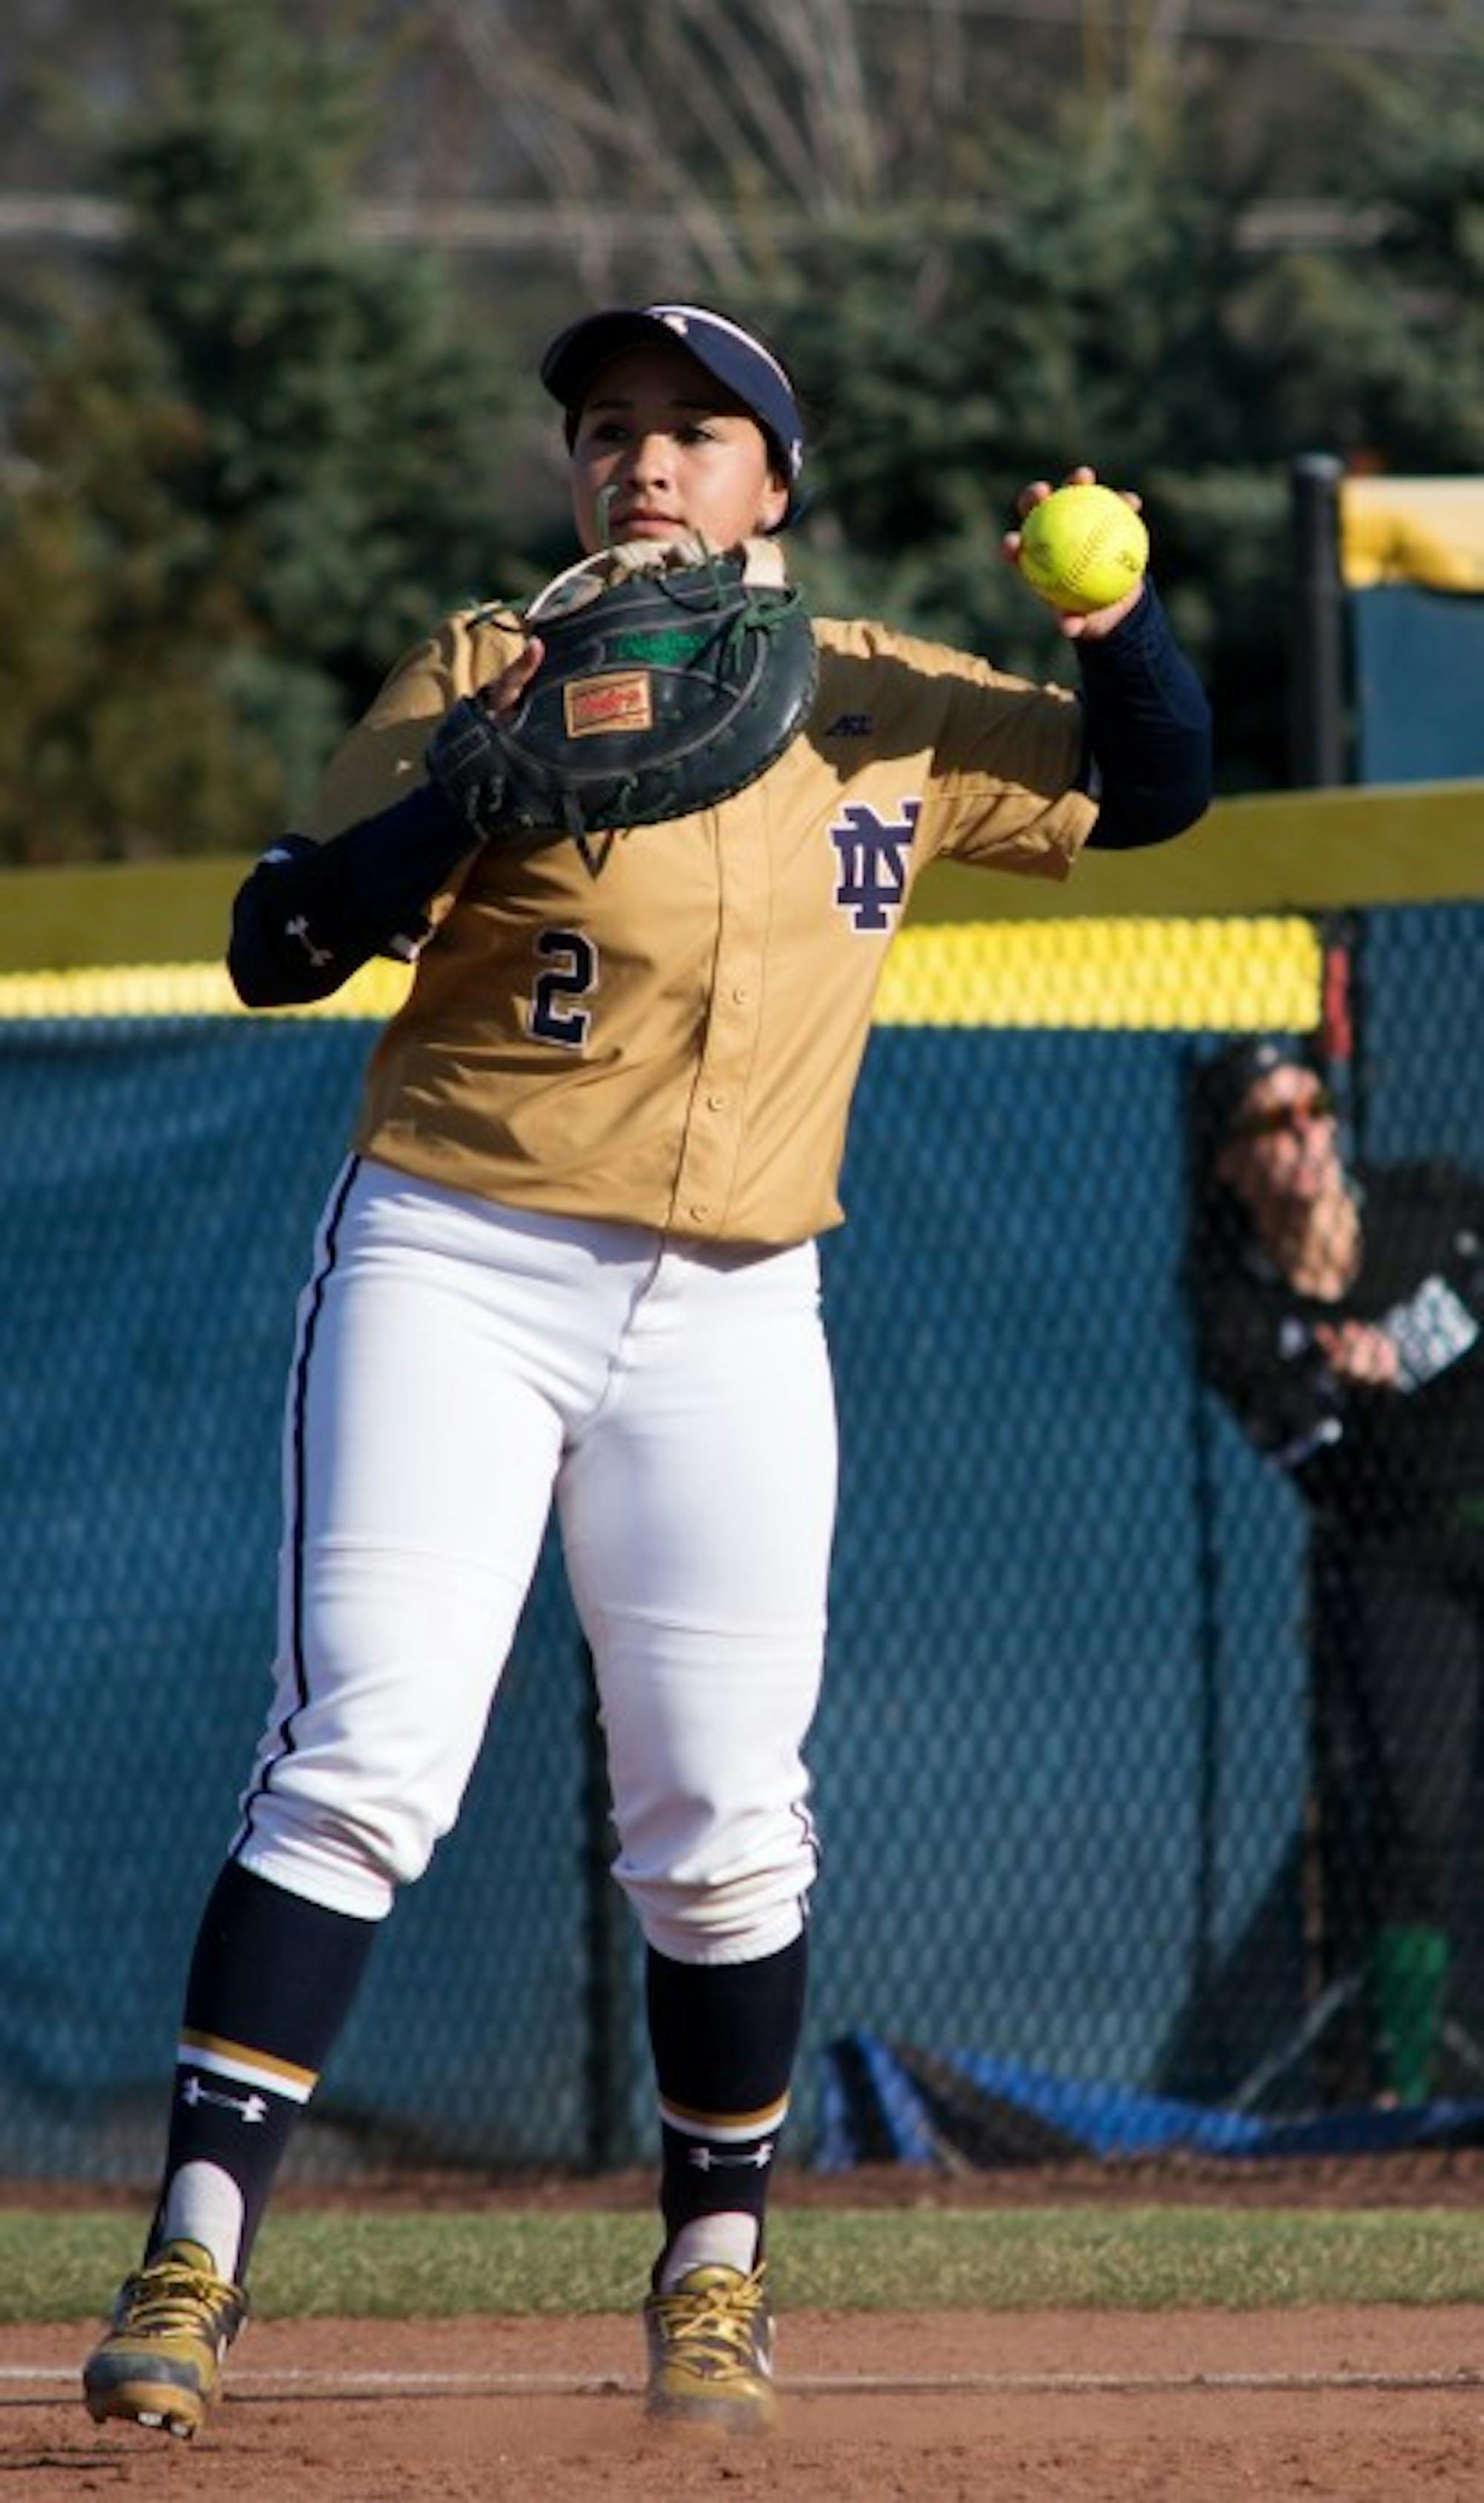 Irish senior first baseman Micaela Arizmendi relays the ball in after recording an out during Notre Dame’s 10-2 win over Eastern Michigan on March 22 at Melissa Cook Stadium.